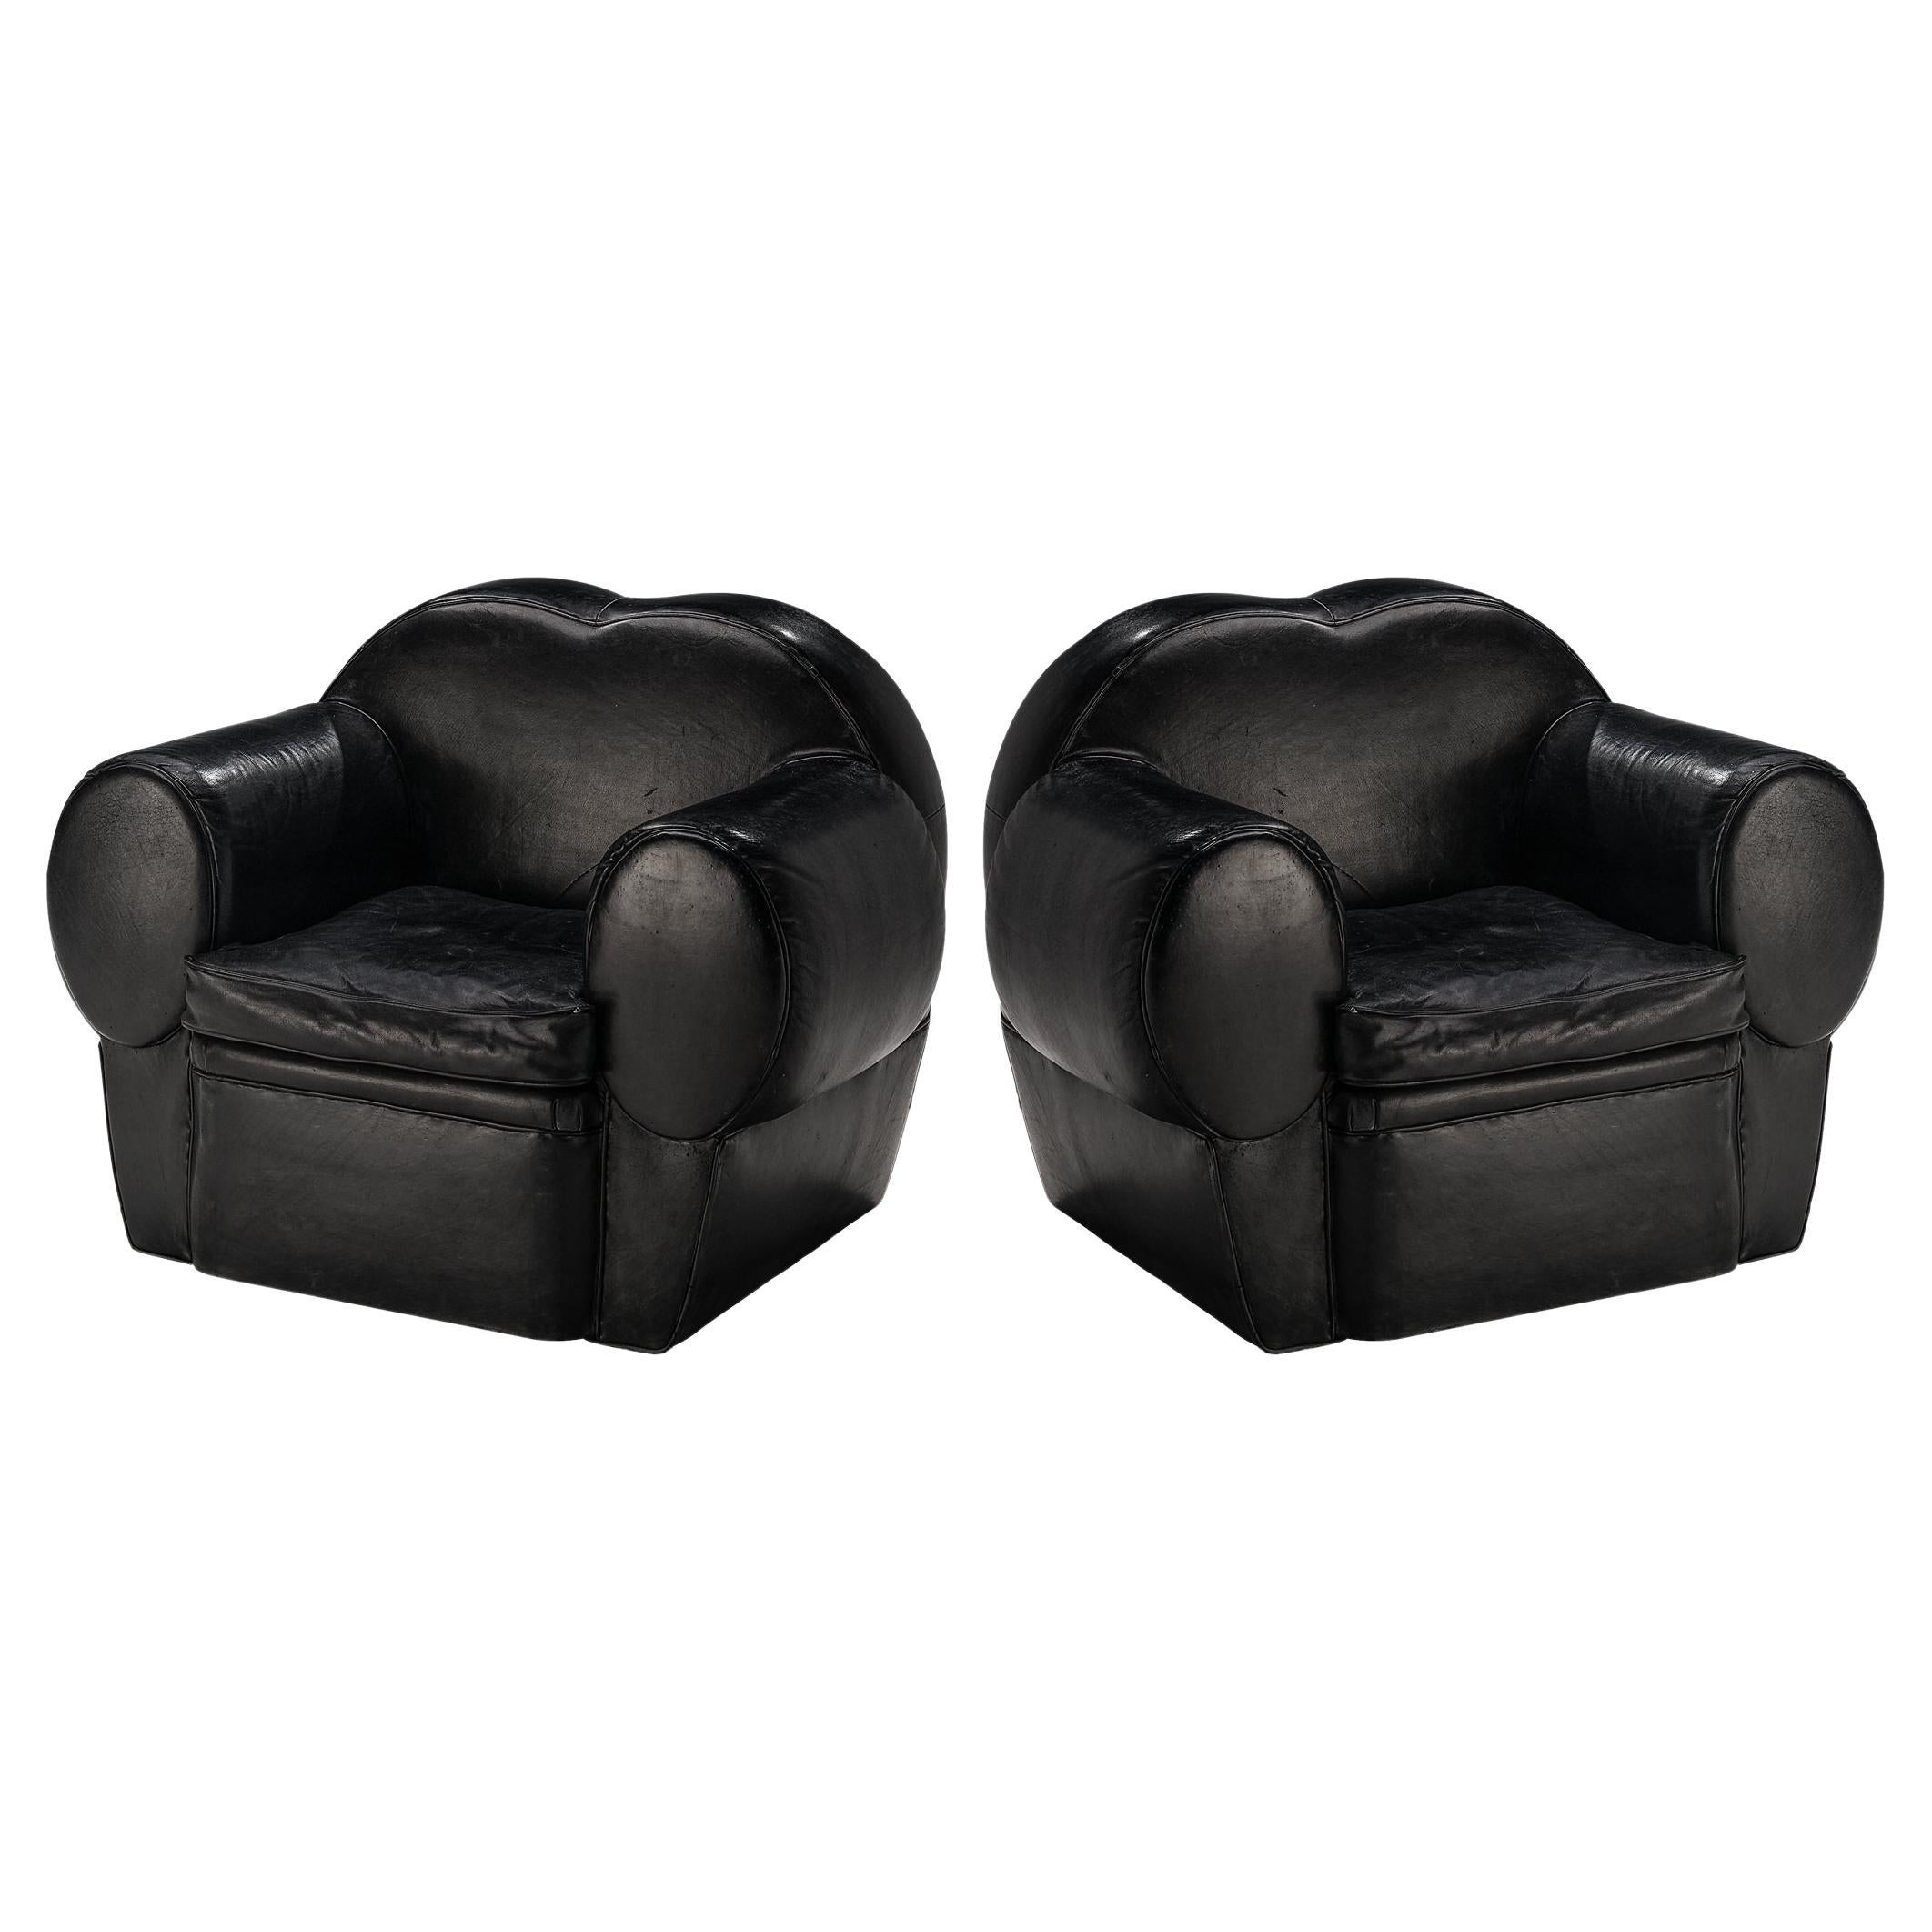 French Art Deco Pair of Lounge Chairs in Black Leather 